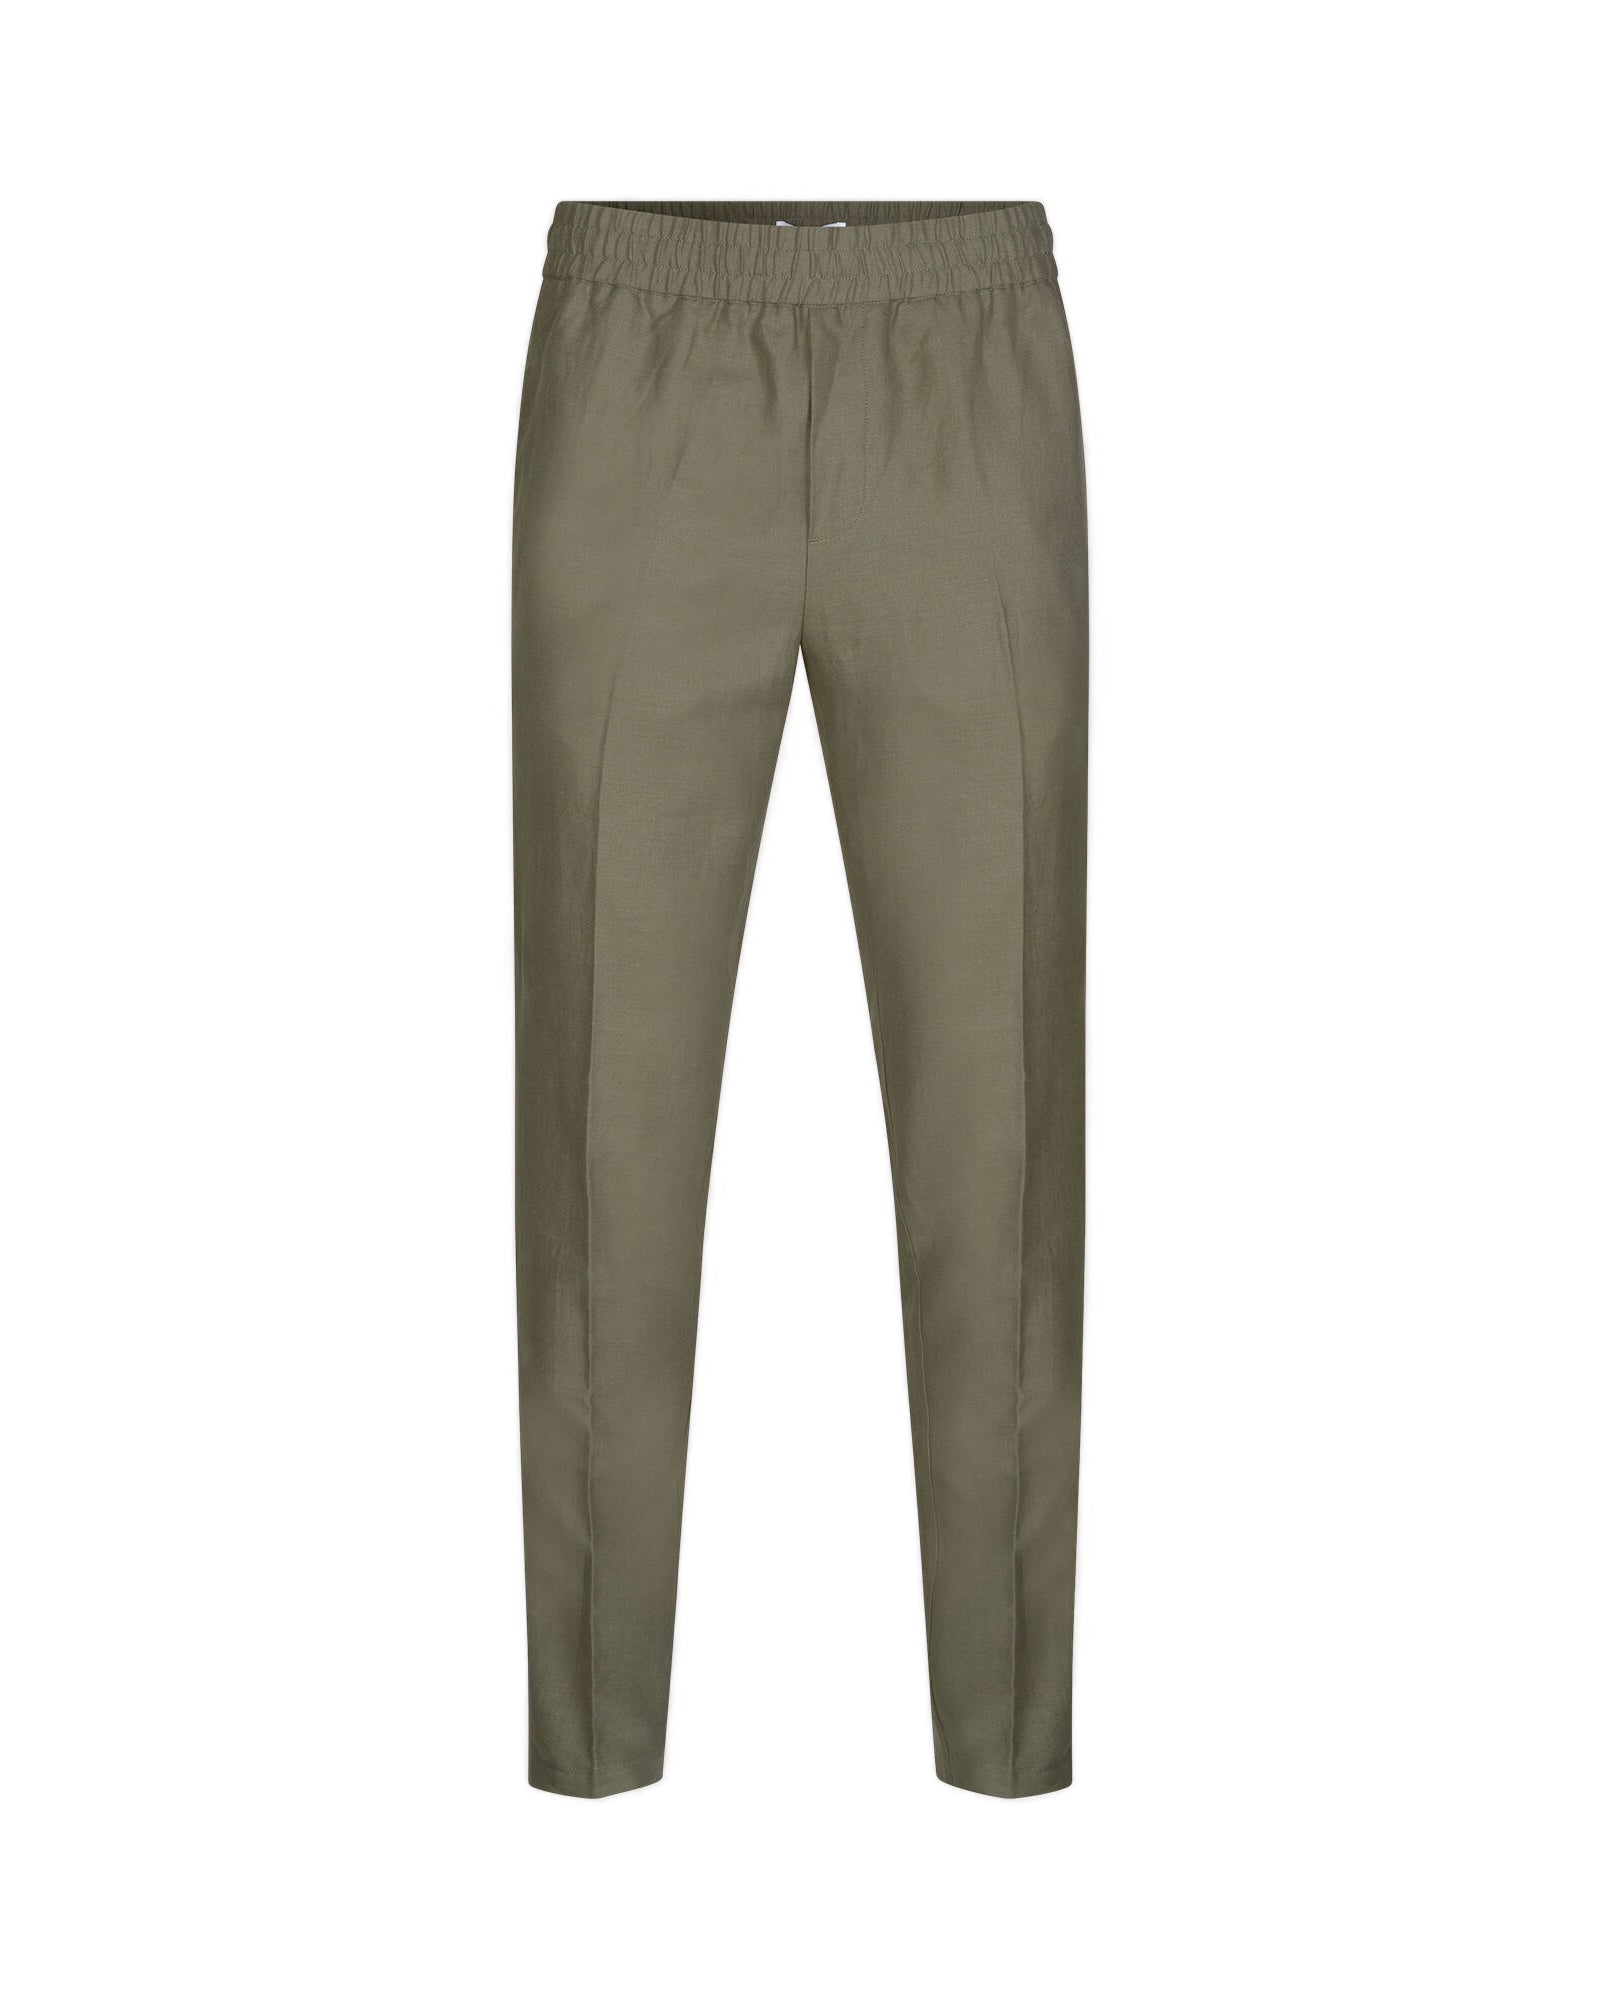 Pantalons Smithy Trousers 10821 - Dusty Olive